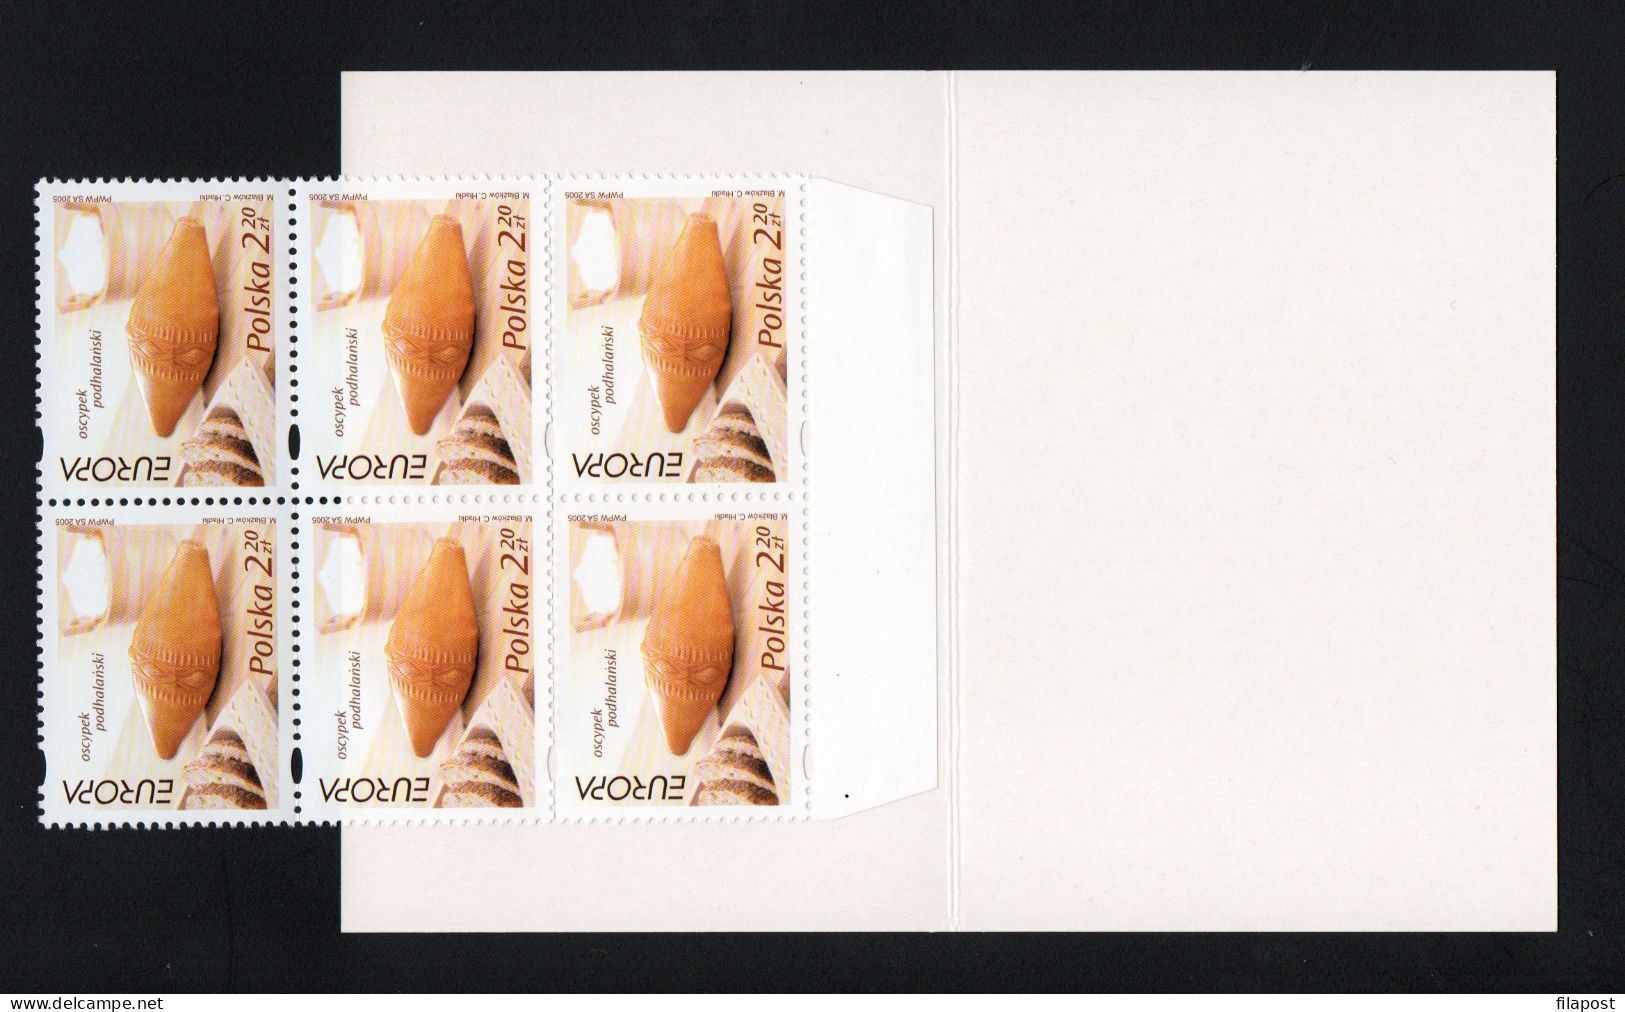 Poland 2005 Mi 4183 Europa - CEPT, Oscypek Cheese, Karpaty Mountain Traditional Food Booklet Set Of 6 Stamps MNH** - Booklets